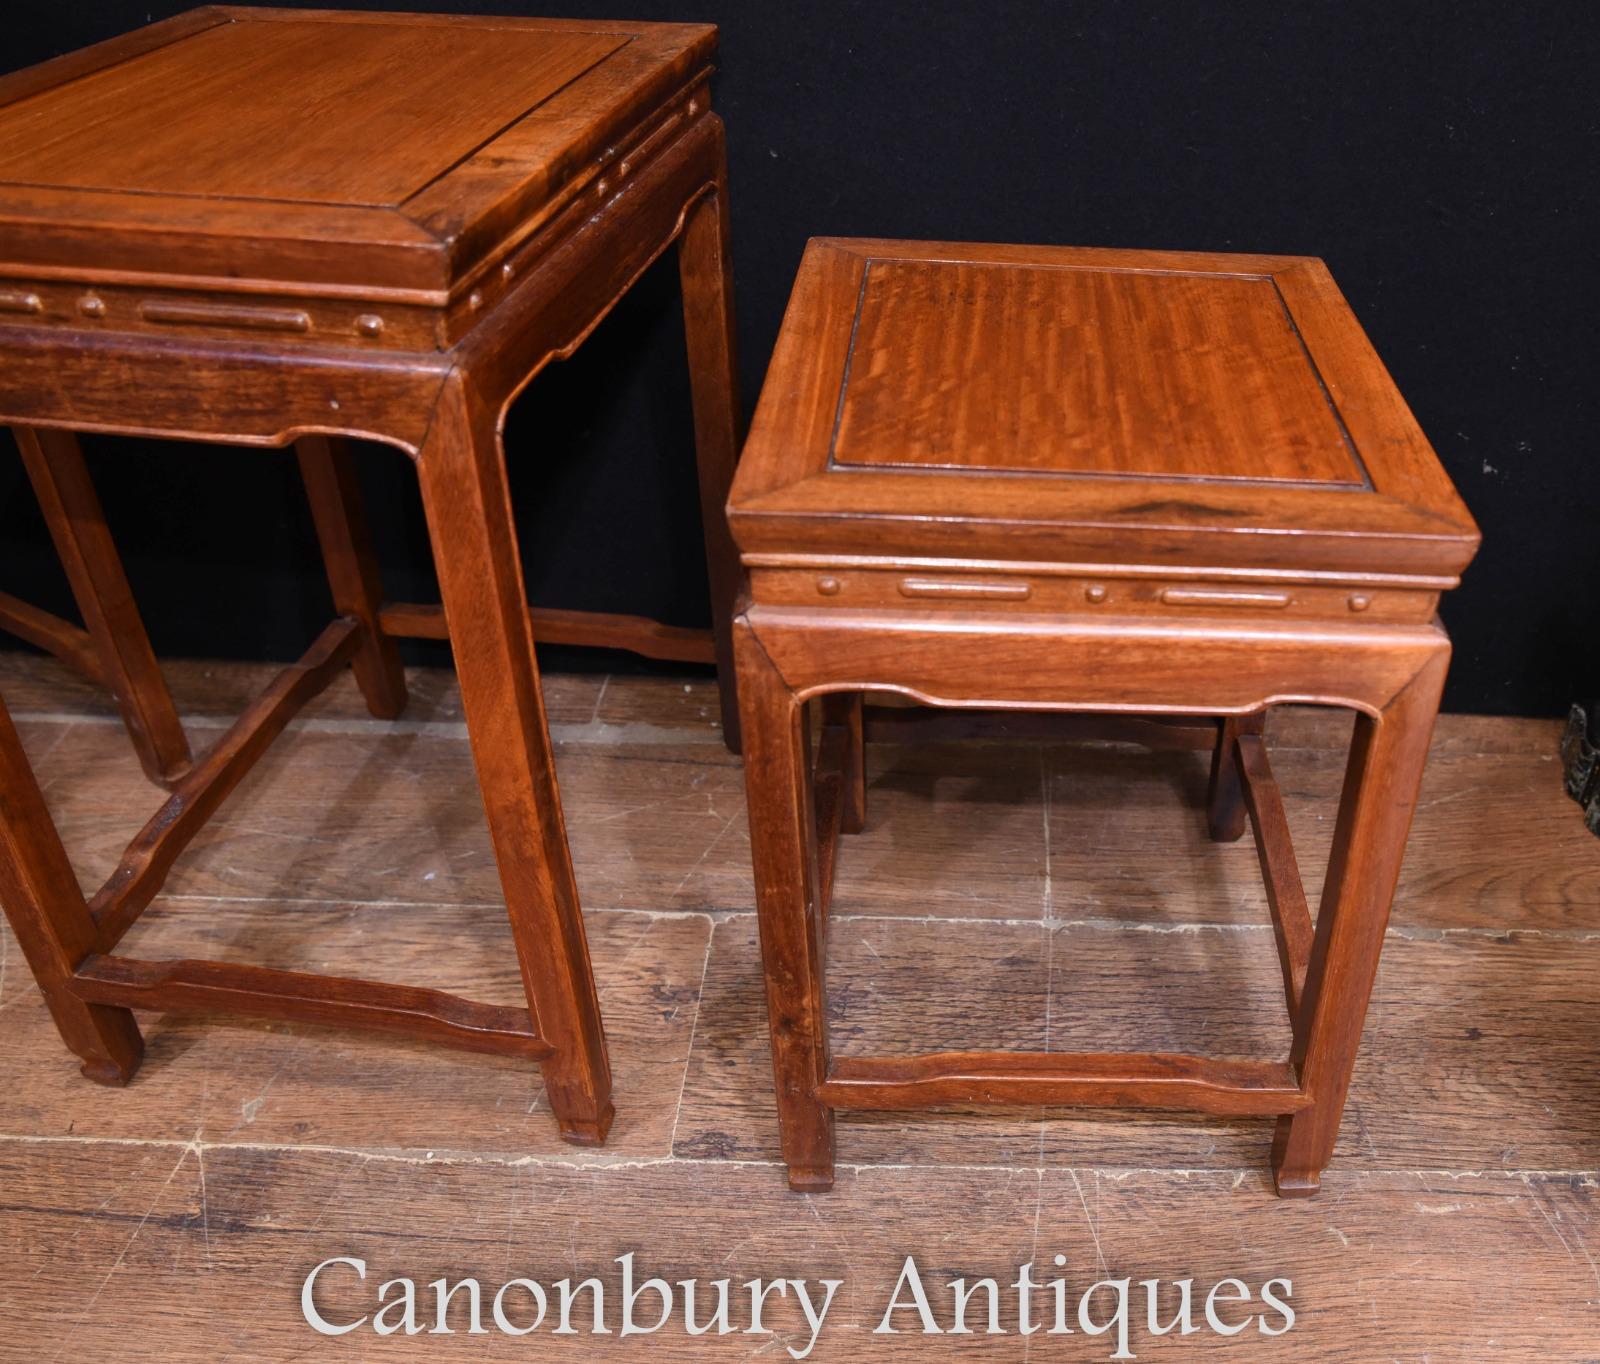 - Nest of four Chinese hardwood side tables.
- Quartetto tables so handy for drinks parties.
- Viewings available by appointment.
- Offered in great shape ready for home use right away.
 